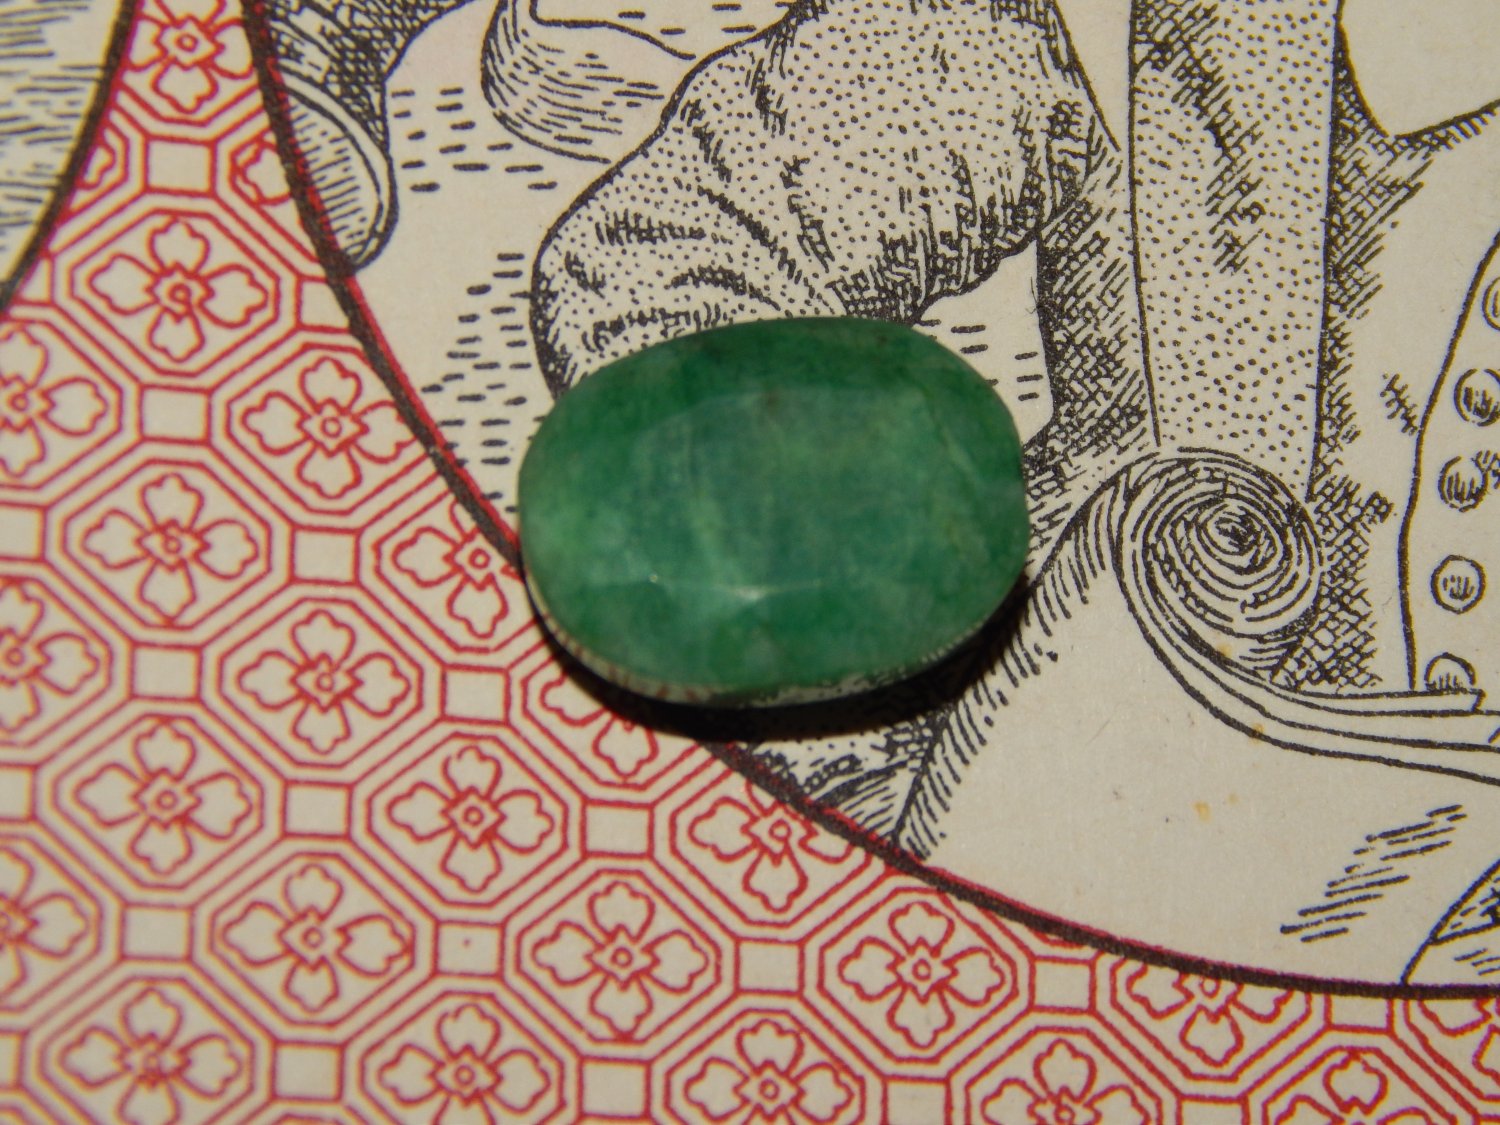 GENUINE EMERALD - Genuine Earth-mined Emerald - Pendant or Ring Size 3 carats